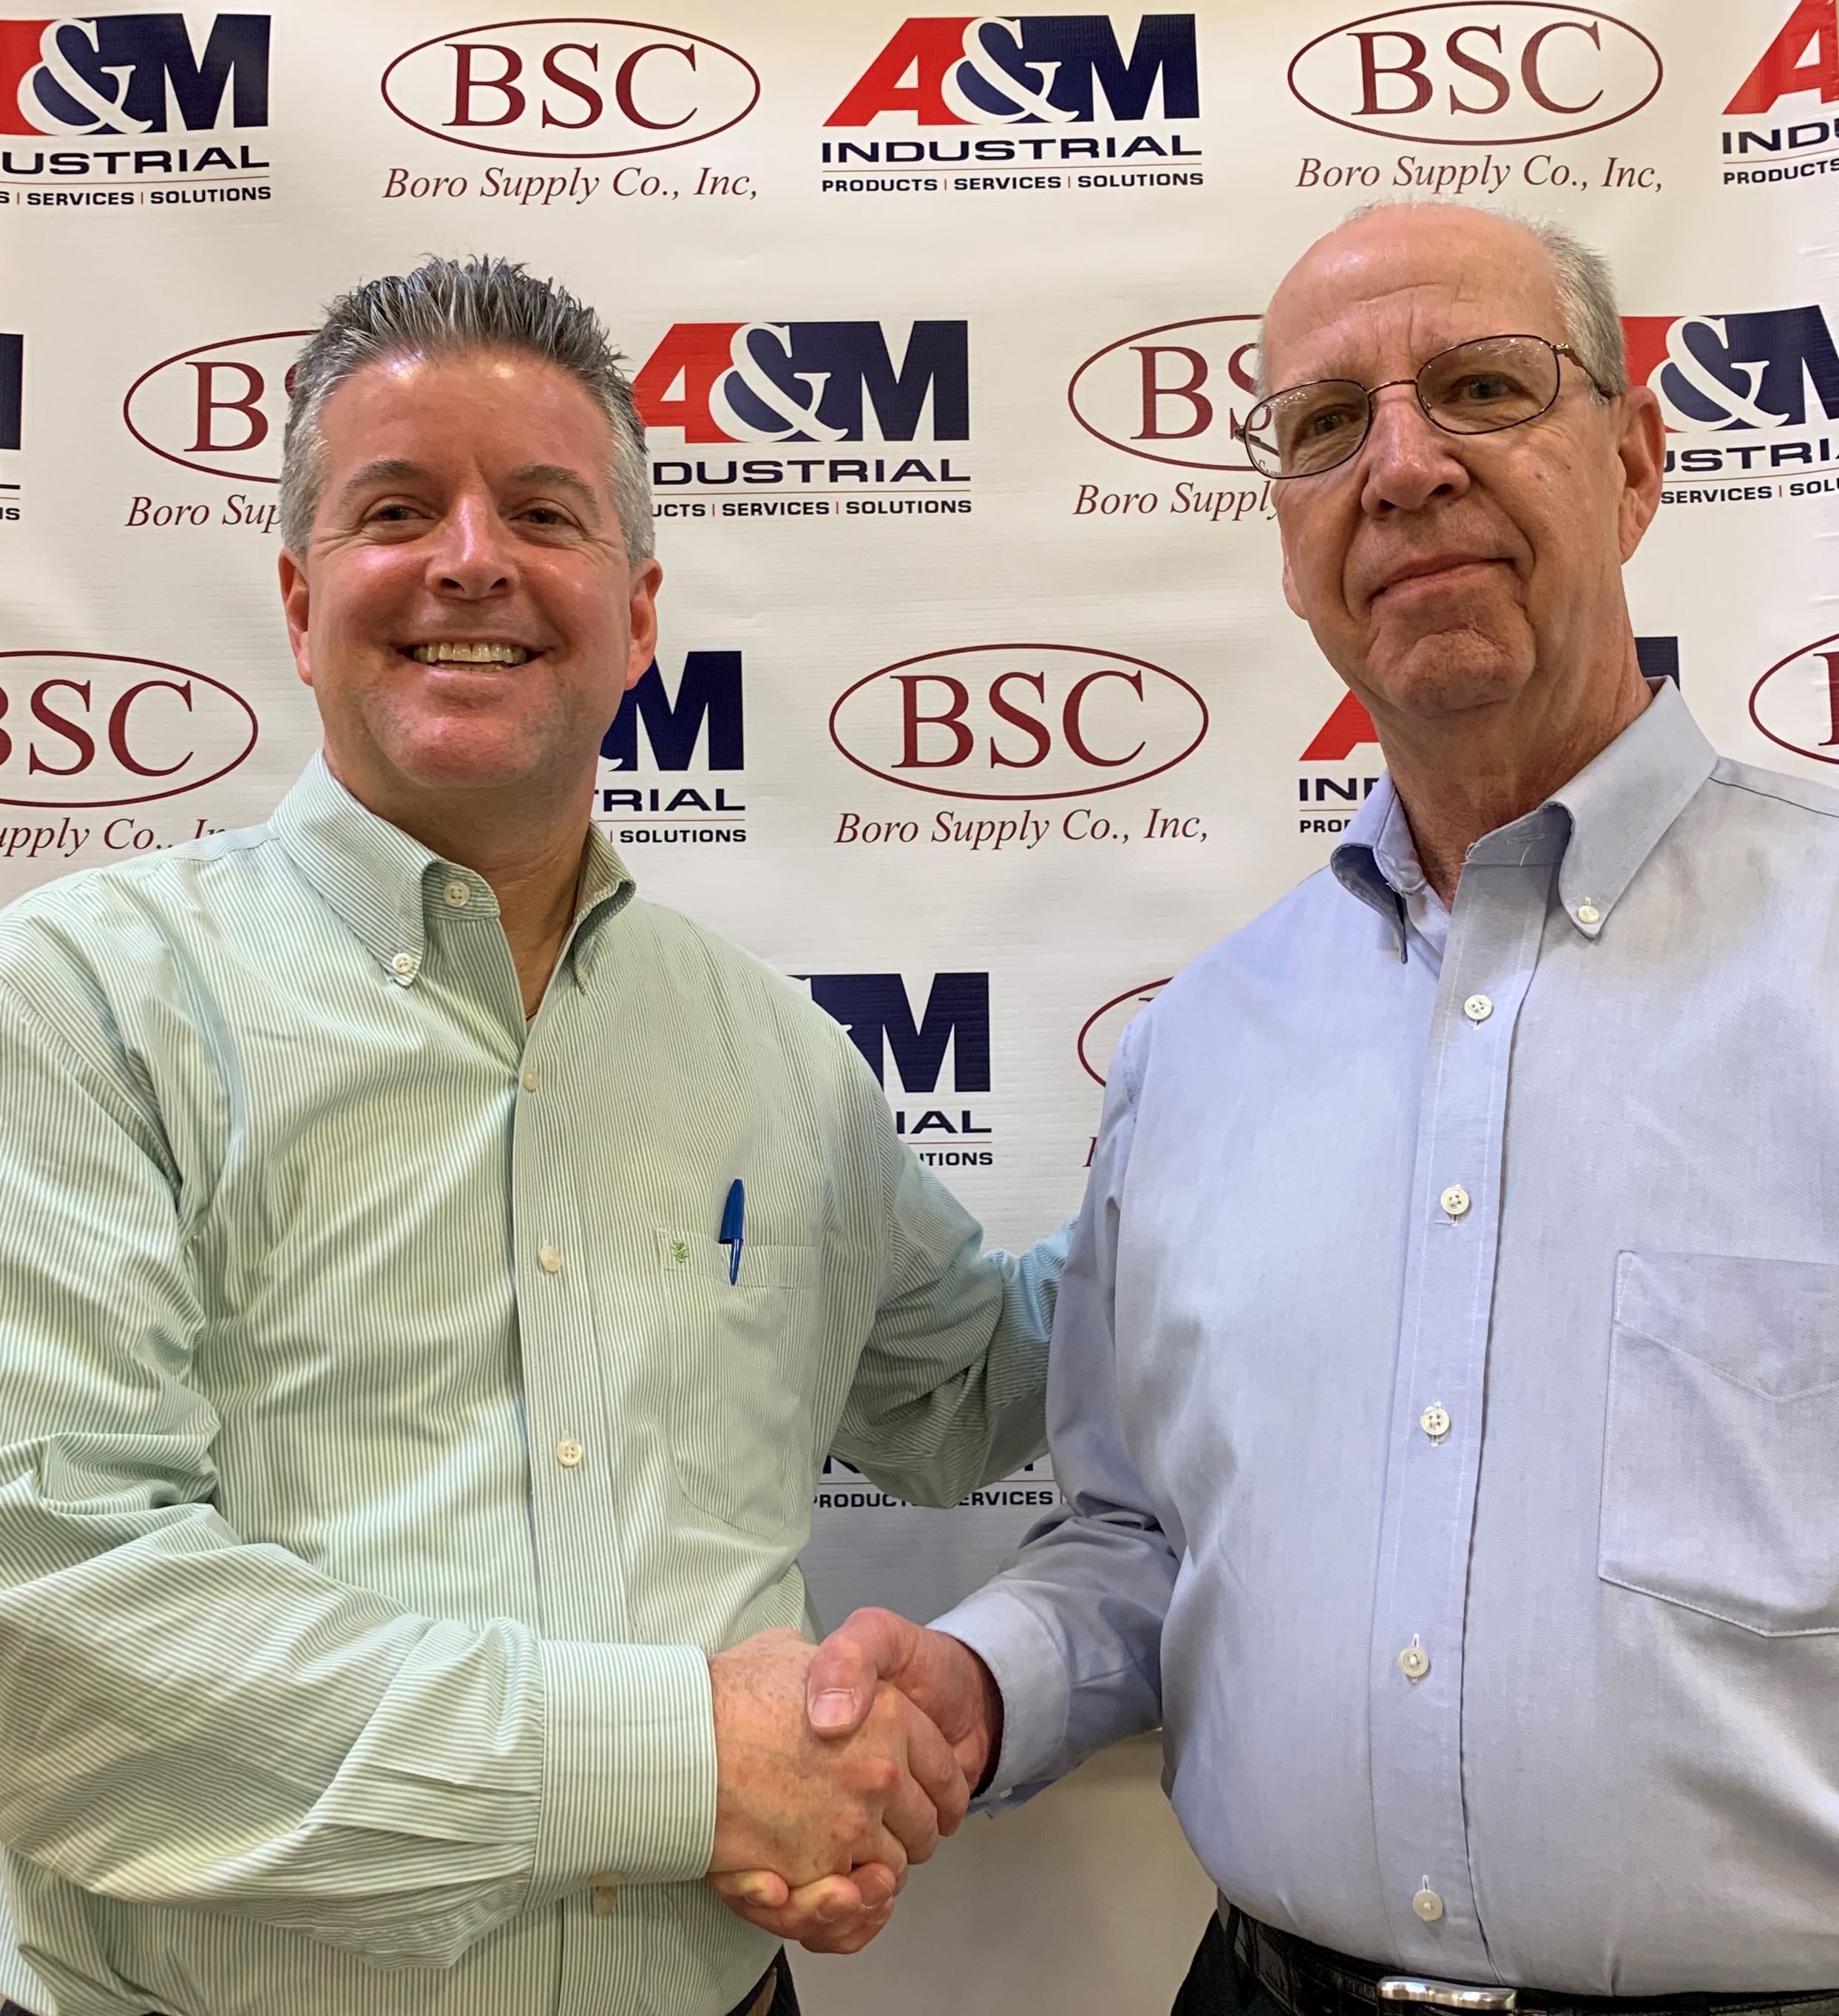 Pictured (l to r) David Young, President A&M Industrial, Stanley Romanek of Boro Supply